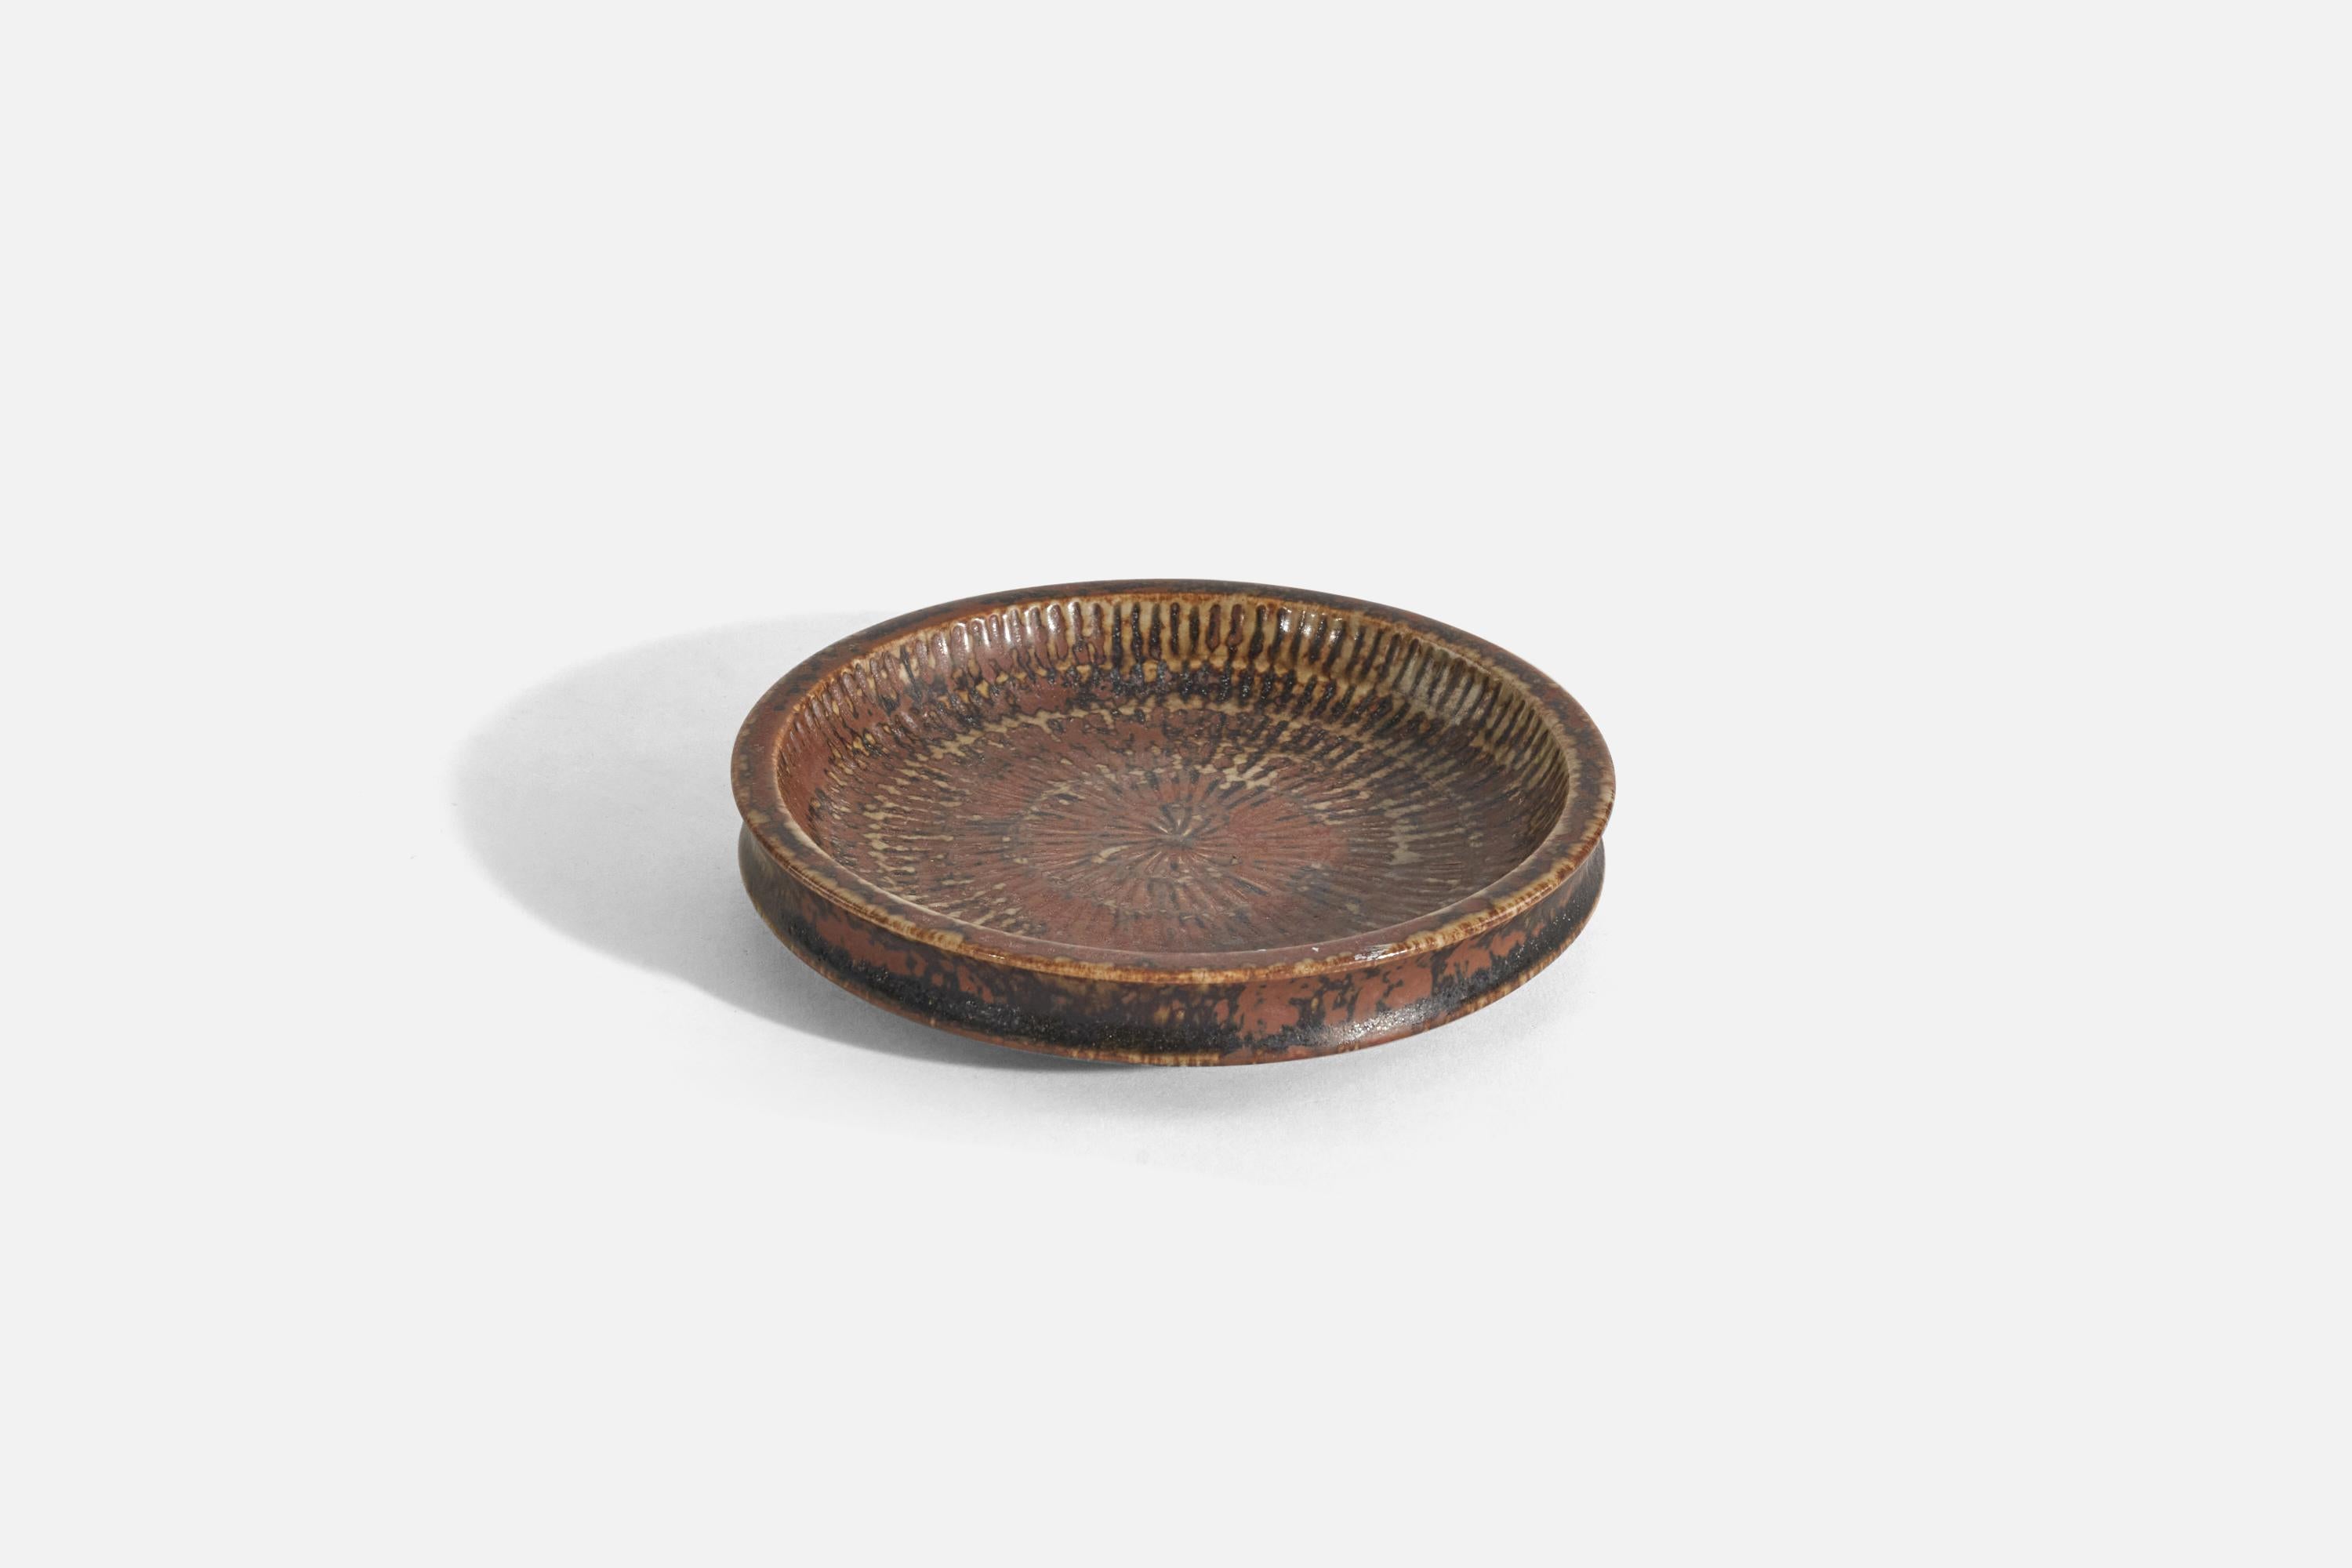 A brown, glazed stoneware decorative dish designed by Stig Lindberg and produced by Gustavsberg, Sweden, 1960s. 

